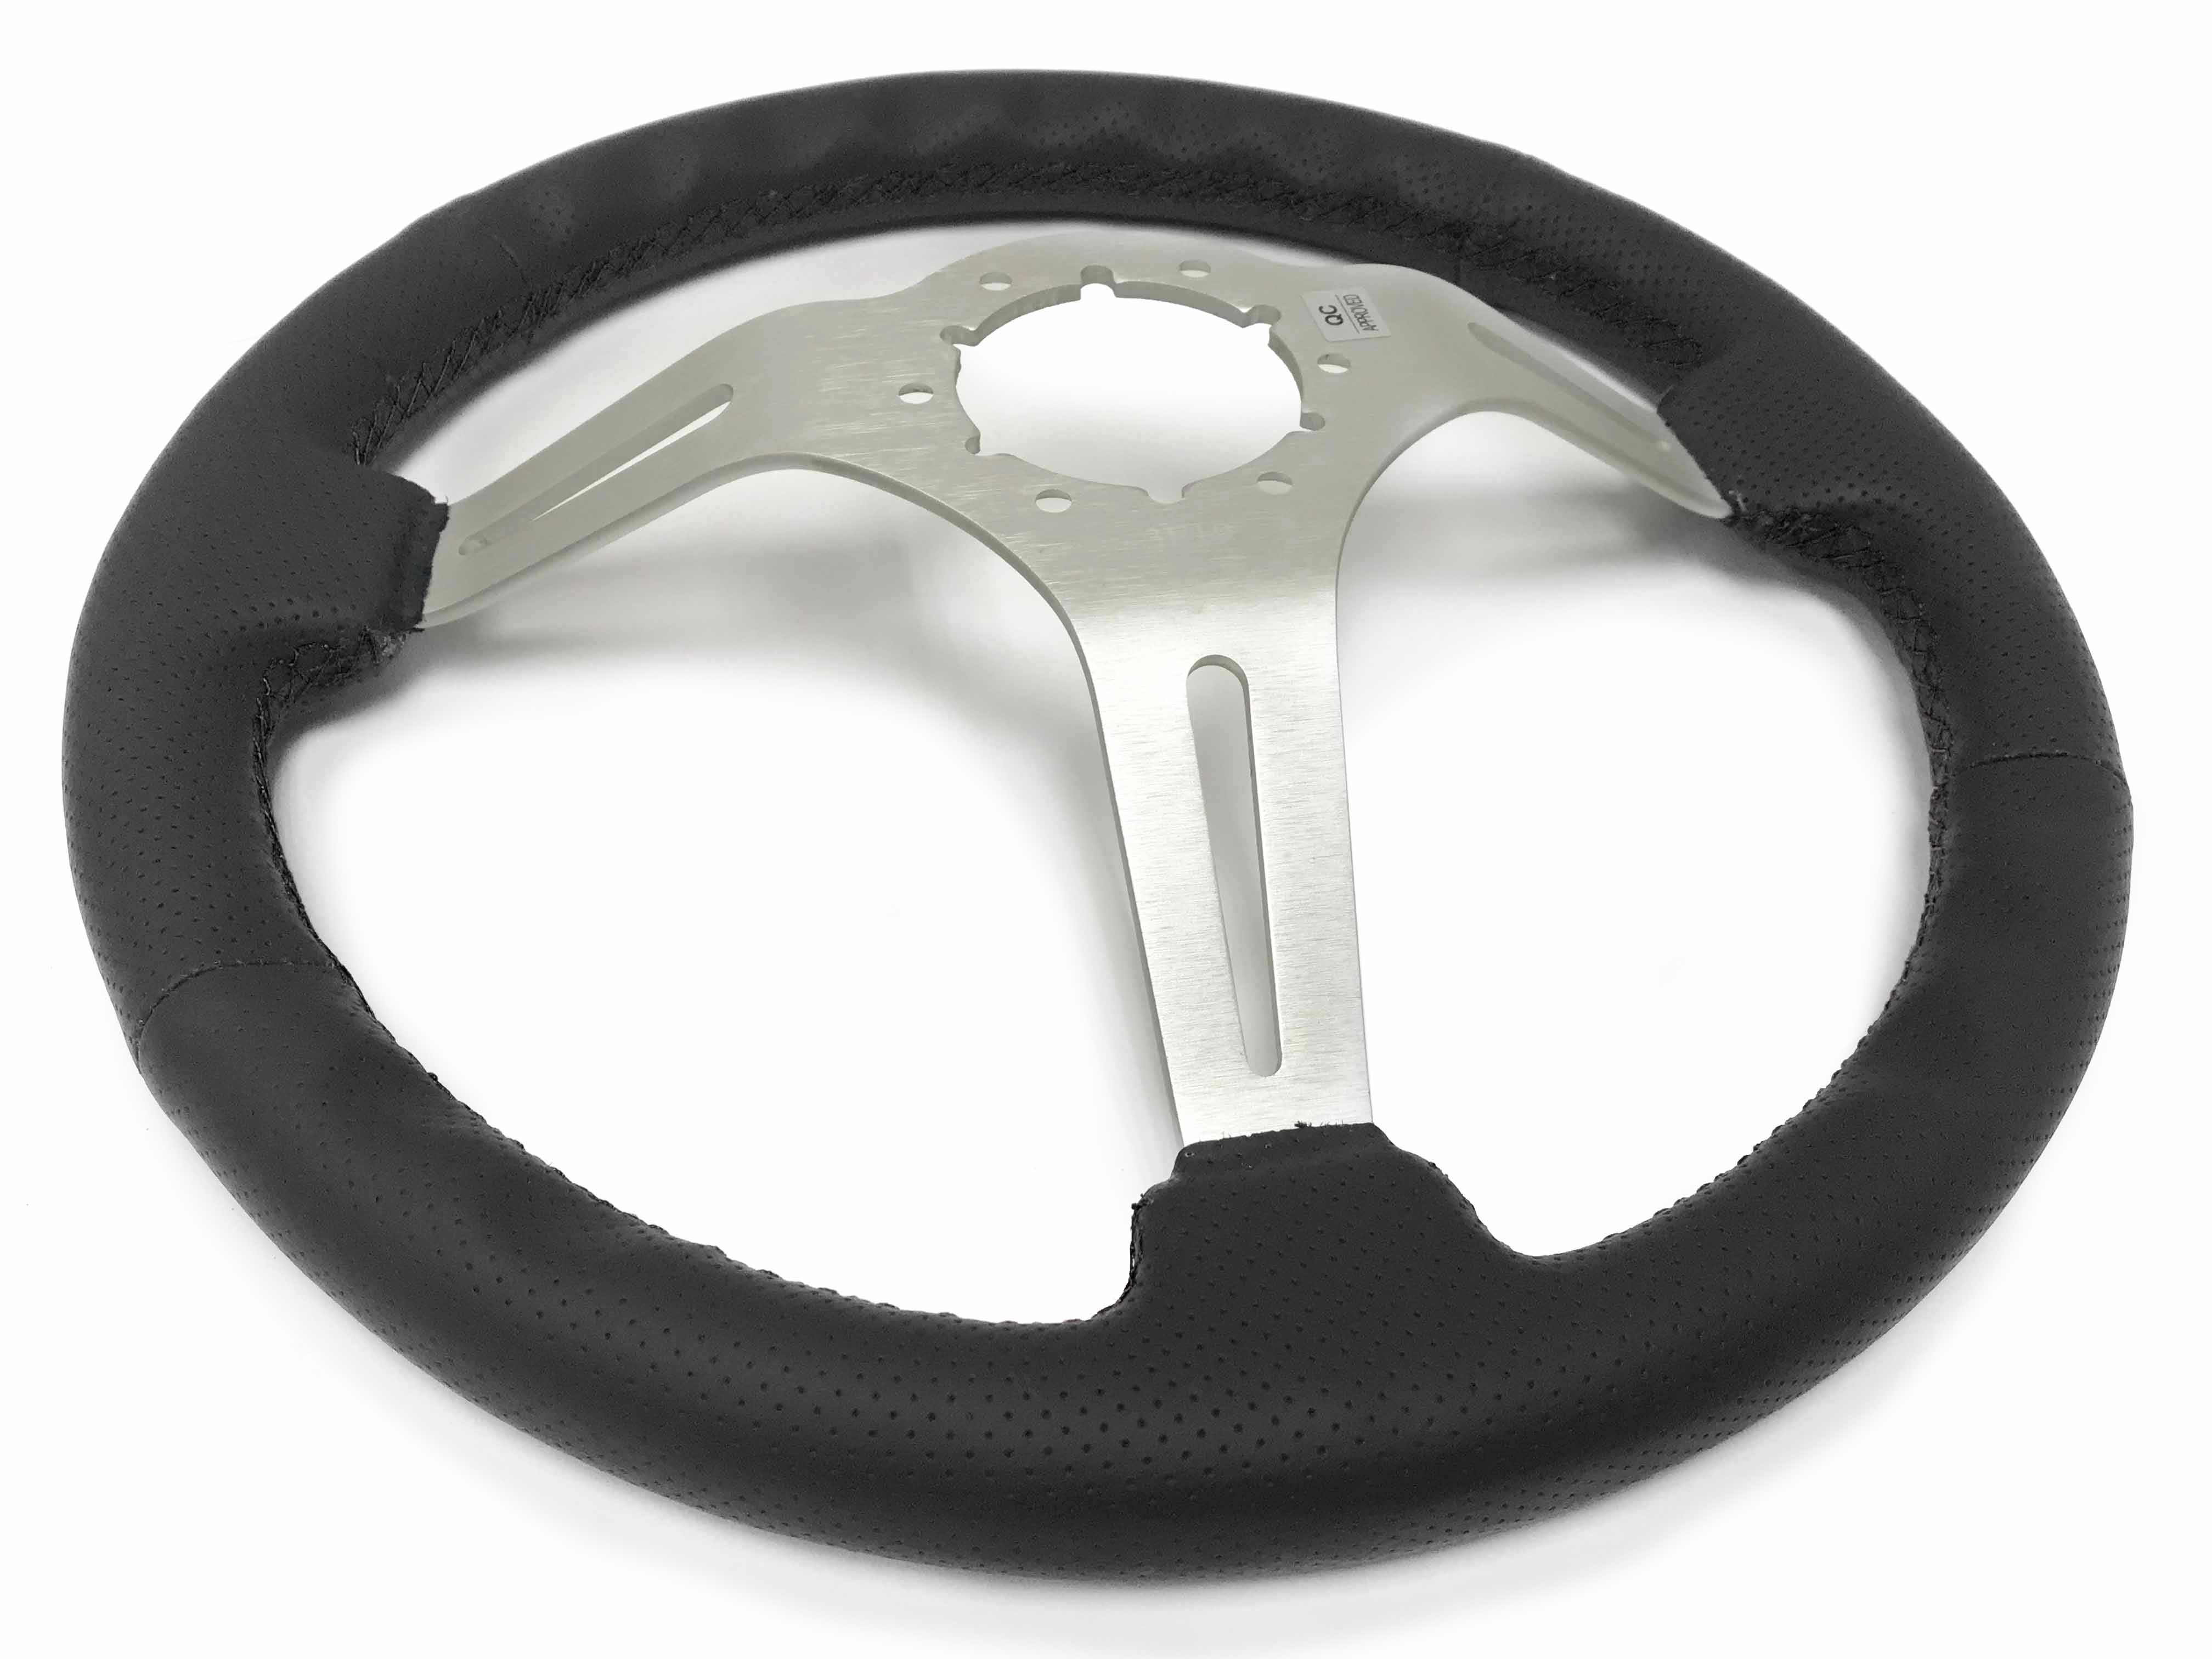 VSW S6 Sport Perforated Leather Brushed Aluminum Steering Wheel